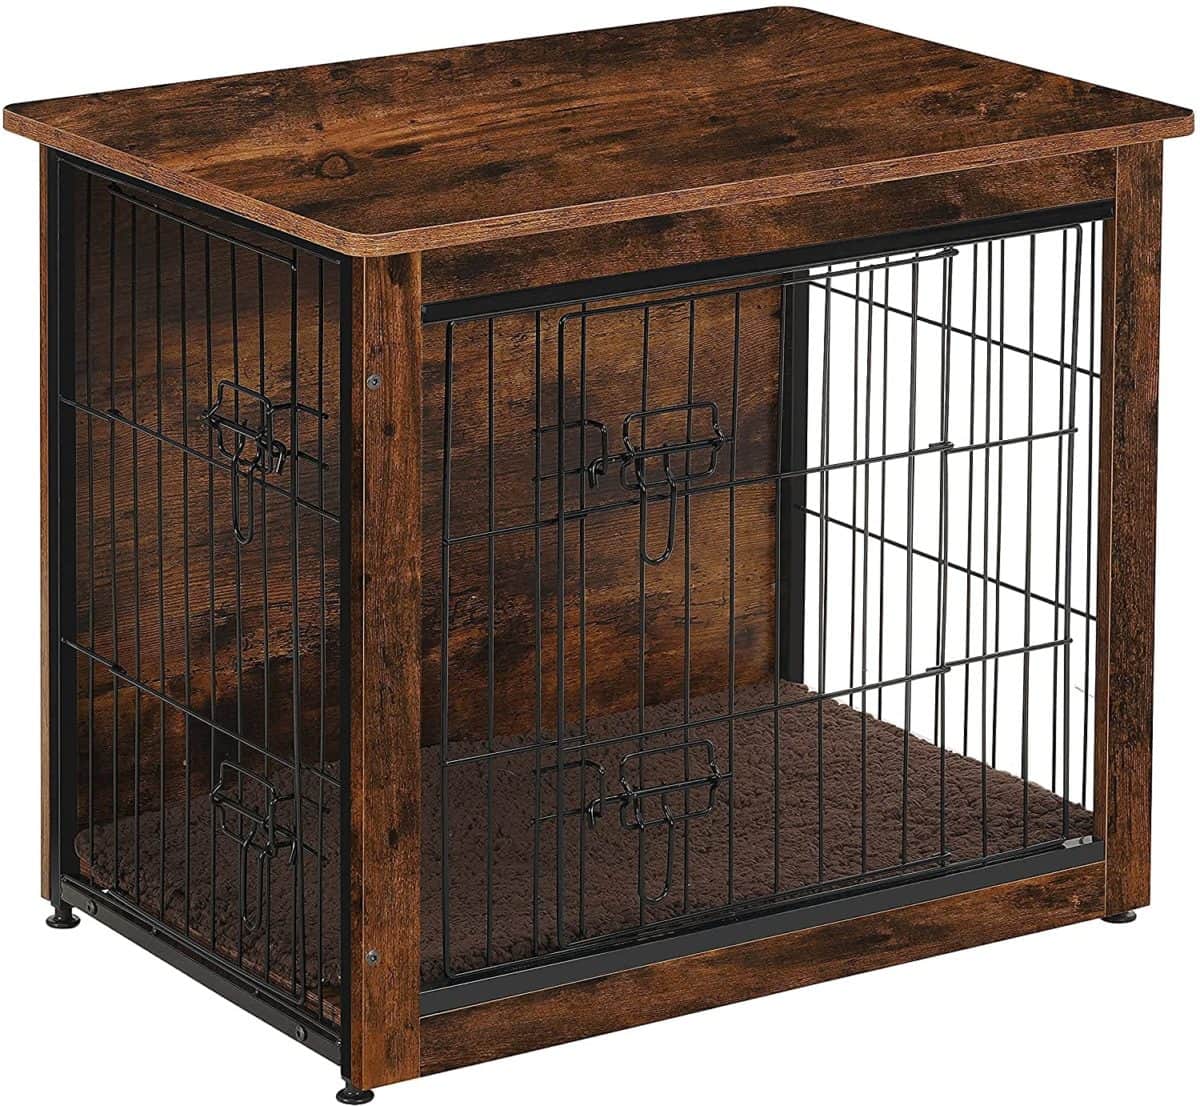 DWANTON Dog Crate Table 1